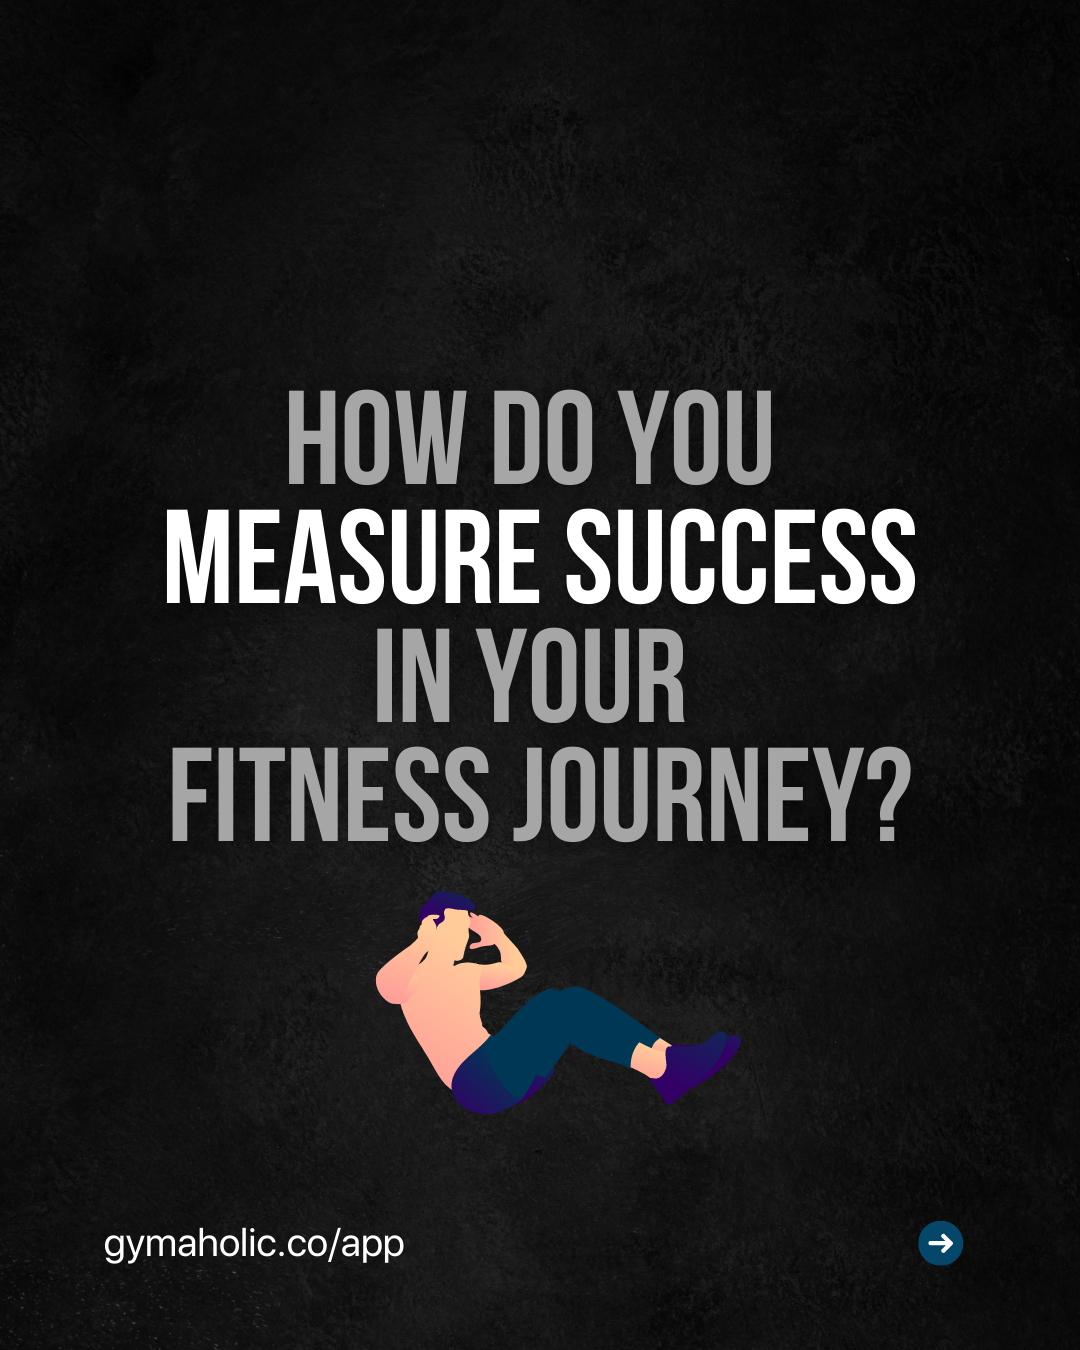 How Do You Measure Success in Your Fitness Journey?